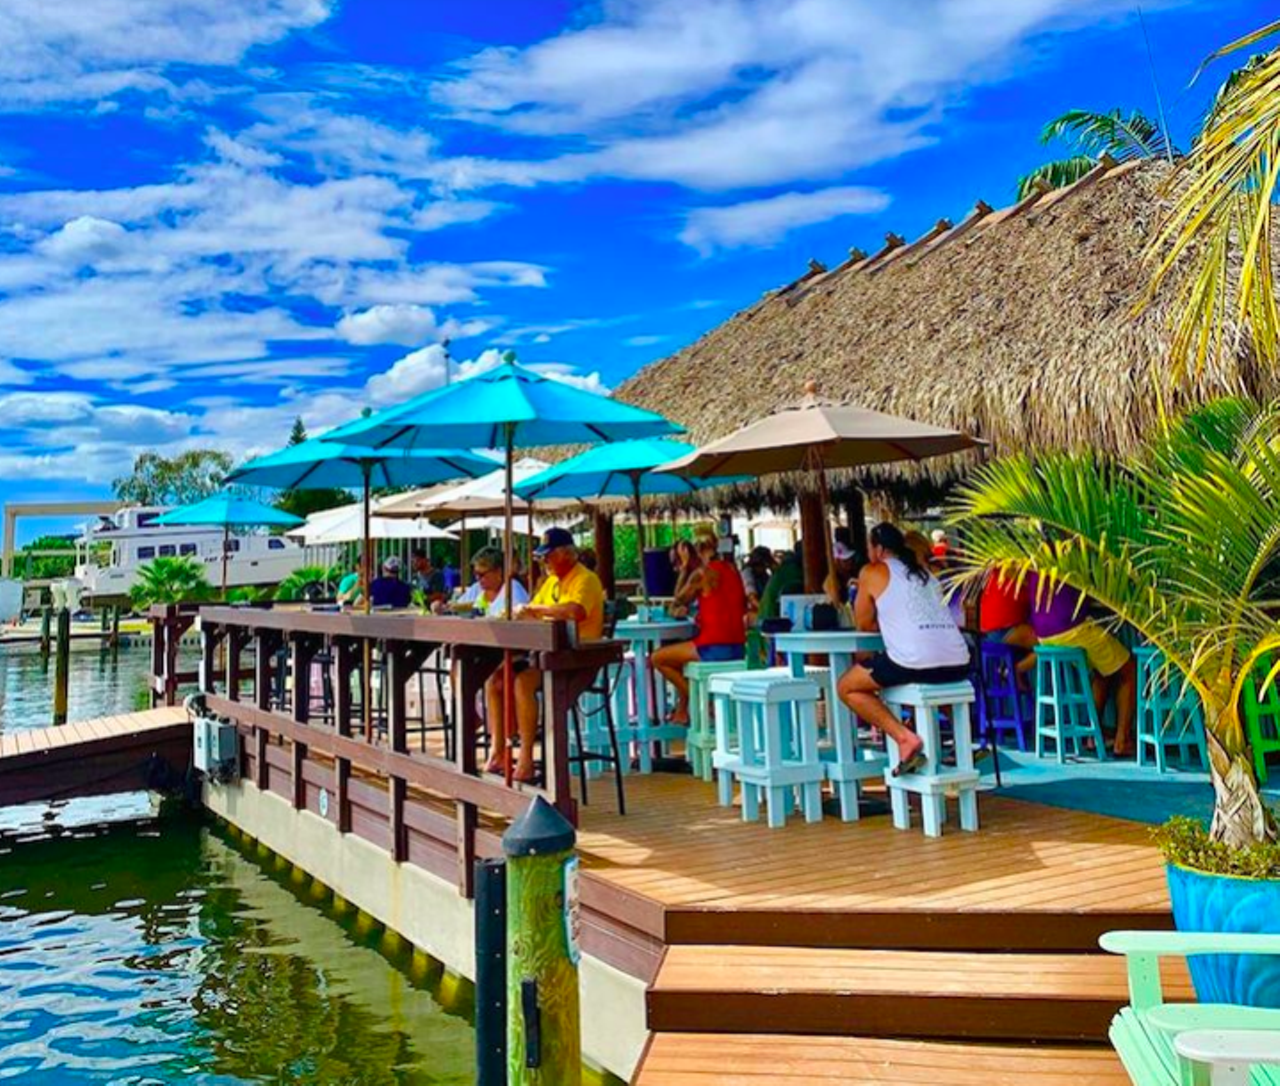 The Getaway
13090 Gandy Blvd. N., St. Petersburg (727)-317-5751
The Getaway offers both outside seating and dockside service to docking boats. Enjoy their Florida-inspired signature cocktails and coastal favorites steps away from the water.
Photo via The Getaway/Facebook